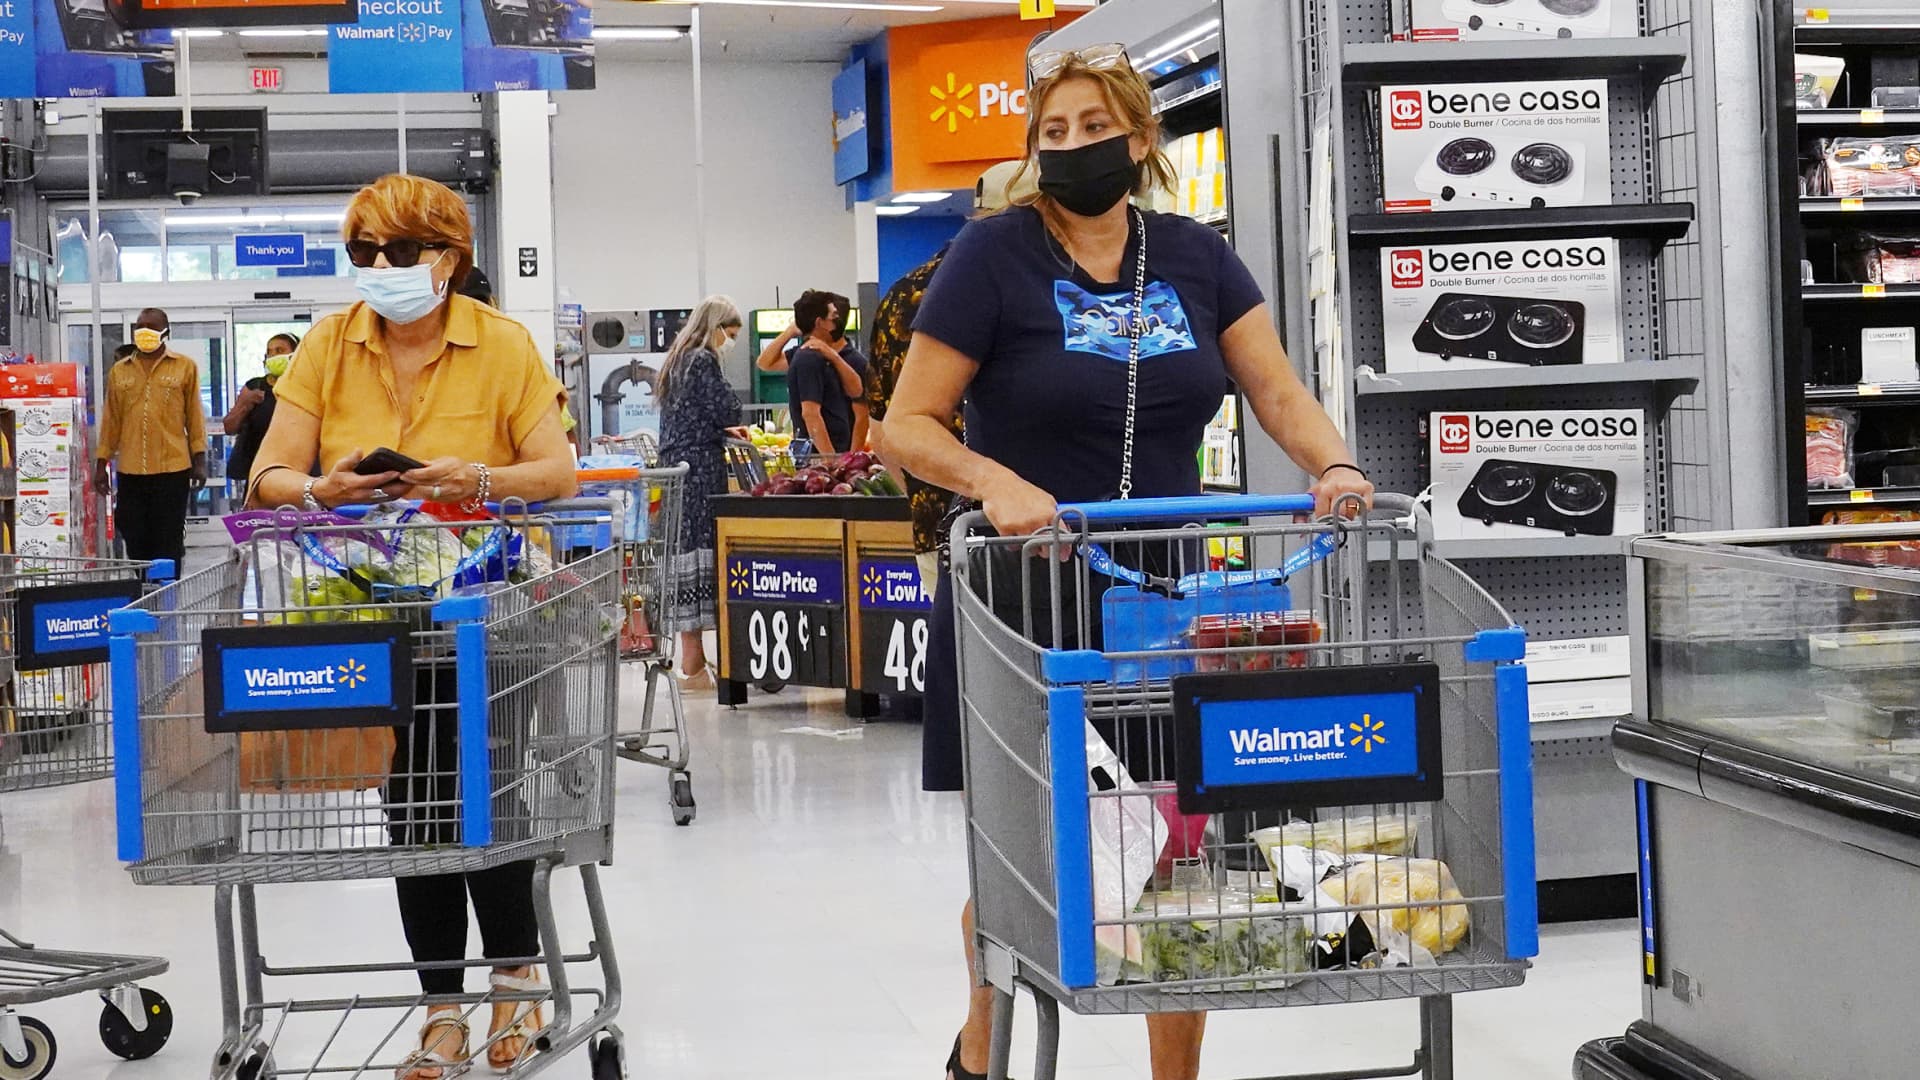 People wearing protective masks shop in a Walmart store on May 18, 2021 in Hallandale Beach, Florida.